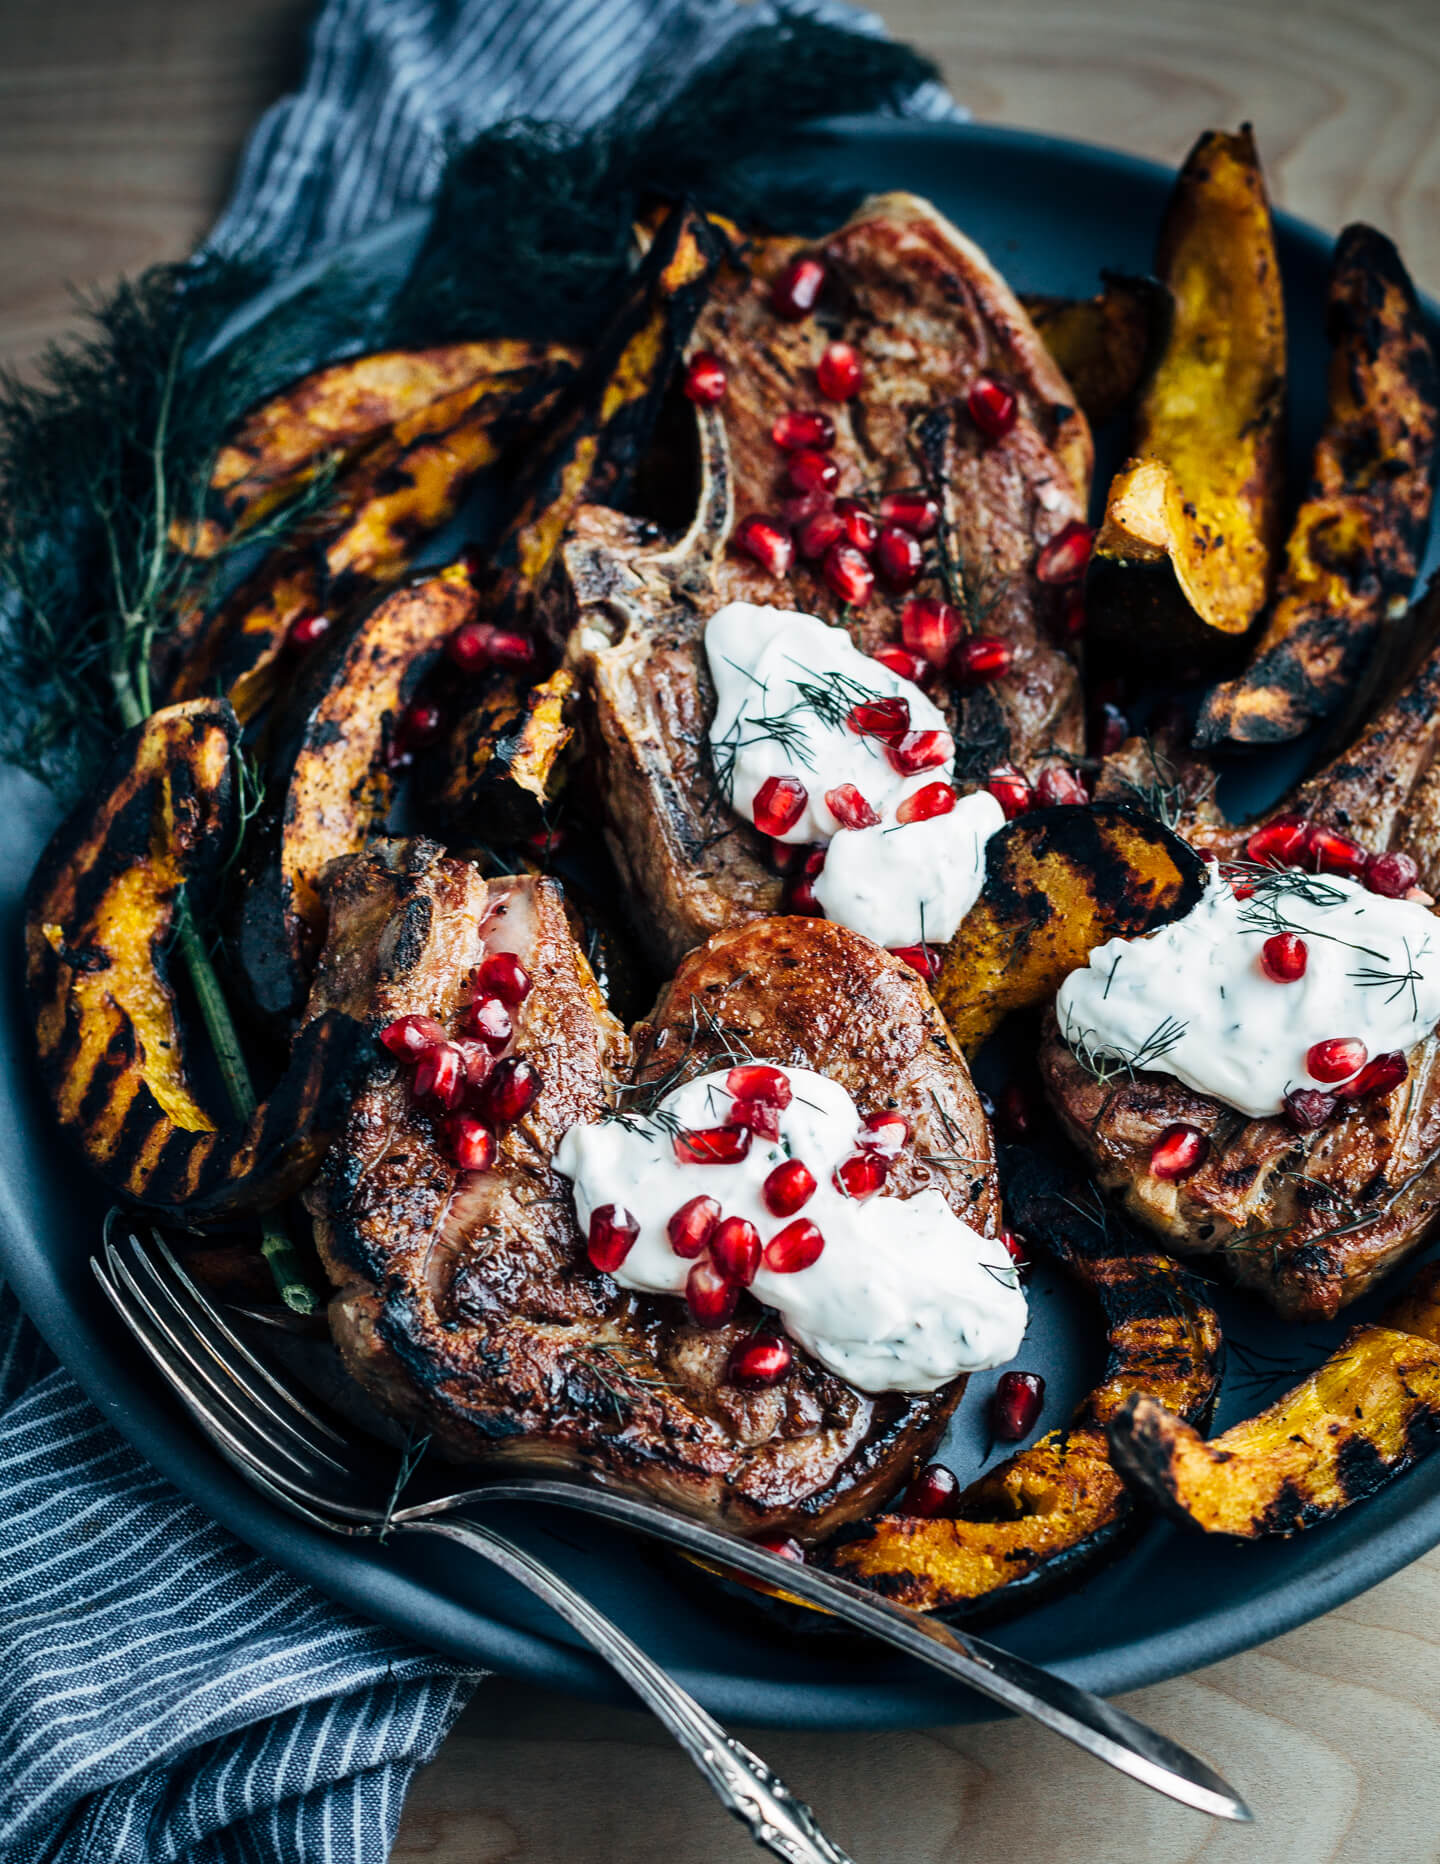 Add a pop of char and smoke to your Thanksgiving feast with this recipe for cumin-rubbed grilled lamb chops, grilled acorn squash wedges, dill and fennel tzatziki, and pomegranate arils. 